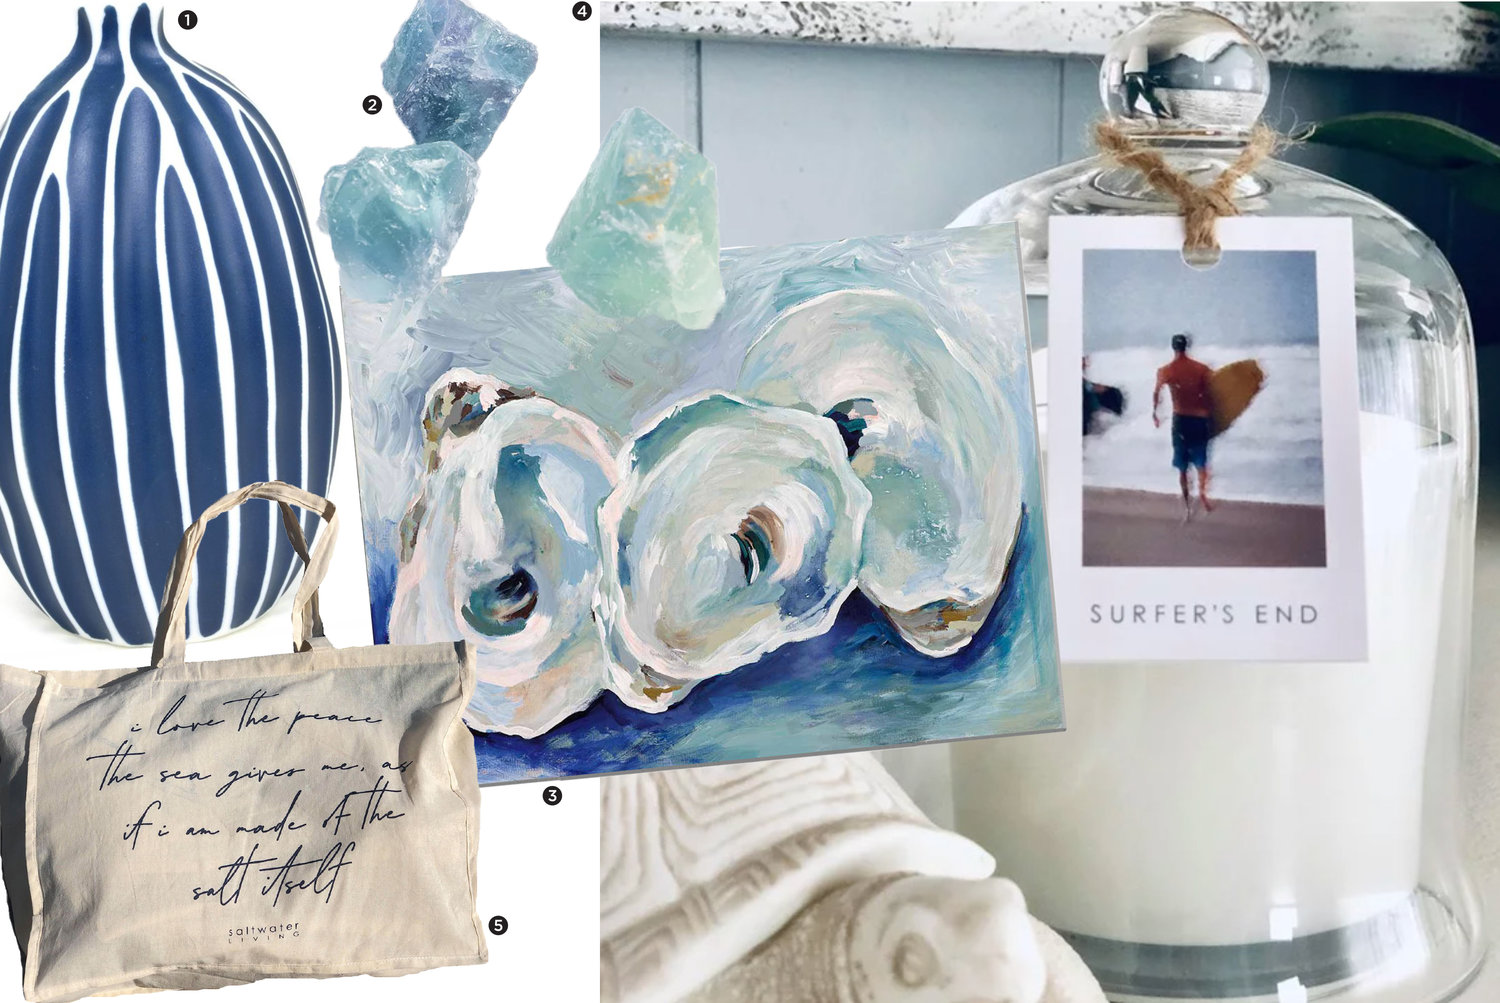 1. Blue Vein vase; 2. Fluorite crystals; 3. Oyster trio print; 4. Surfer’s End candle; 4. Tote bag